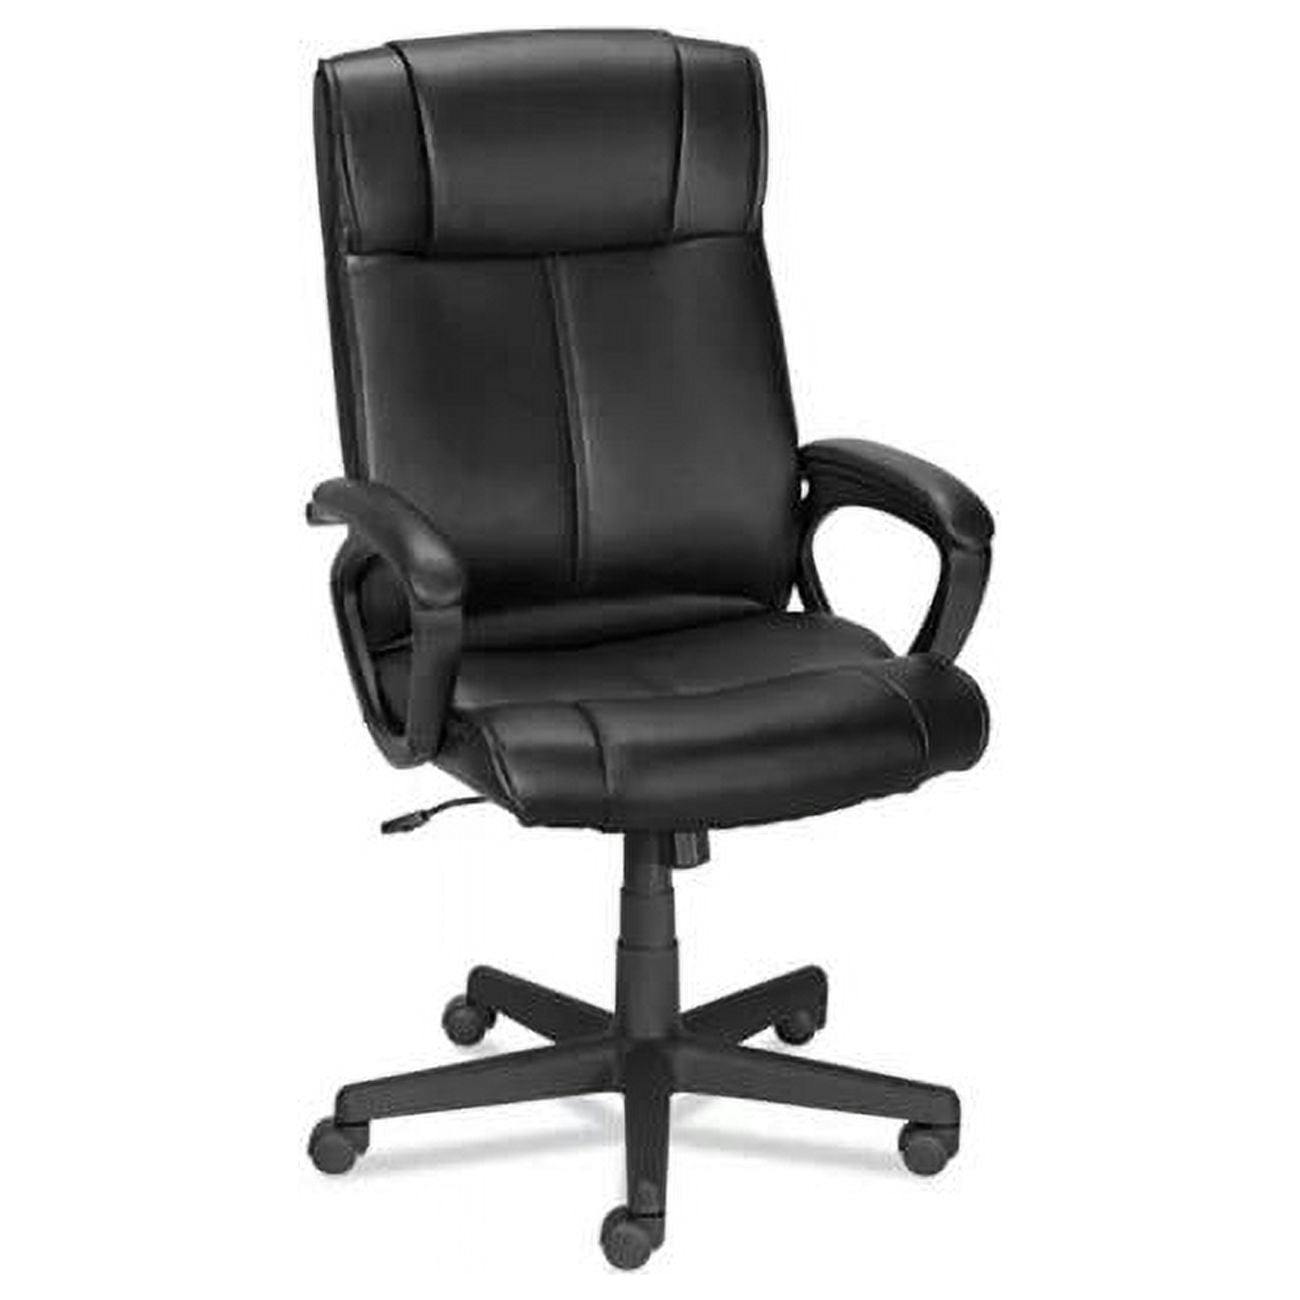 Luxurious High-Back Black Leather Swivel Manager's Chair